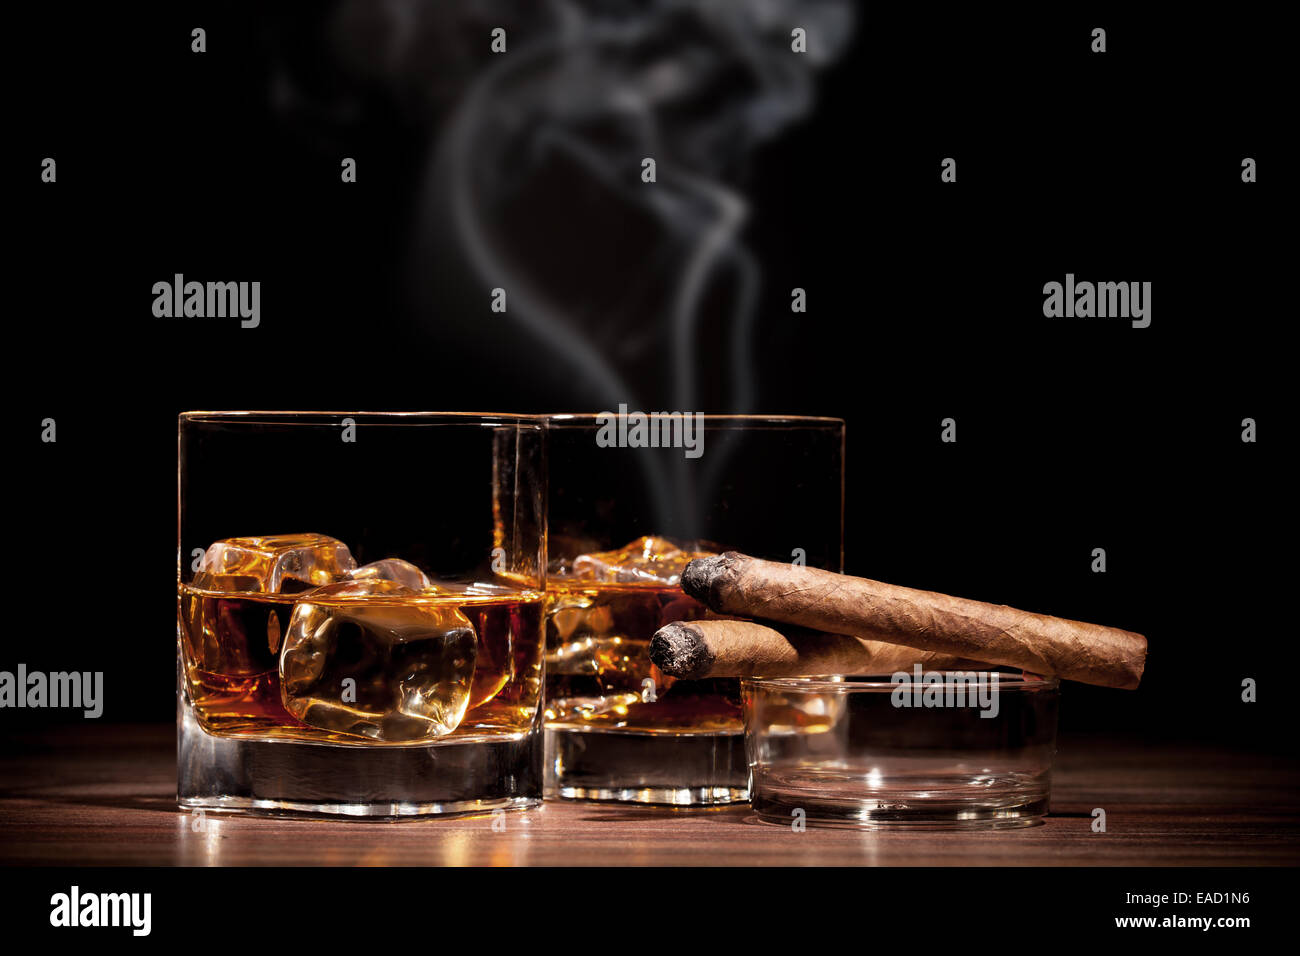 Whiskey drinks with smoking cigars on wooden table Stock Photo